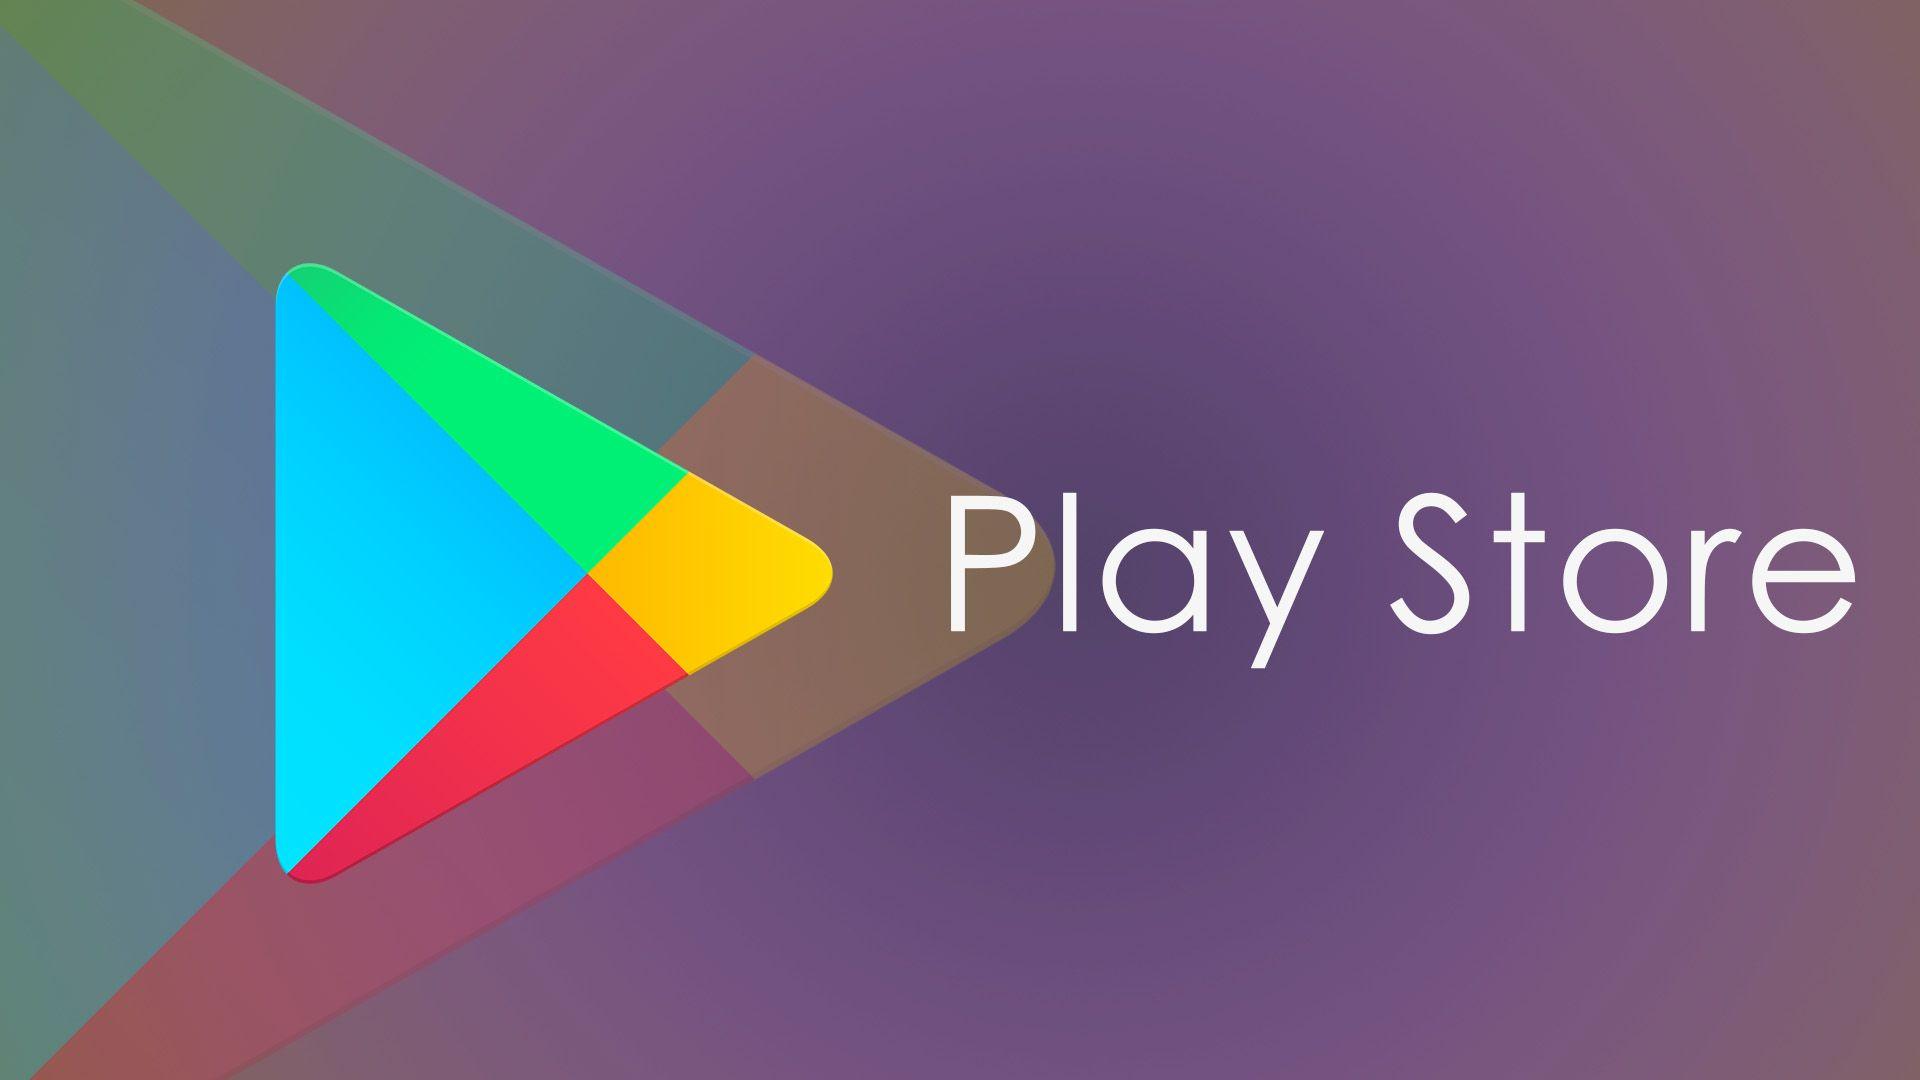 Google Play Store Logo - Google Play Store Redesign Under Works, Colorless Elements